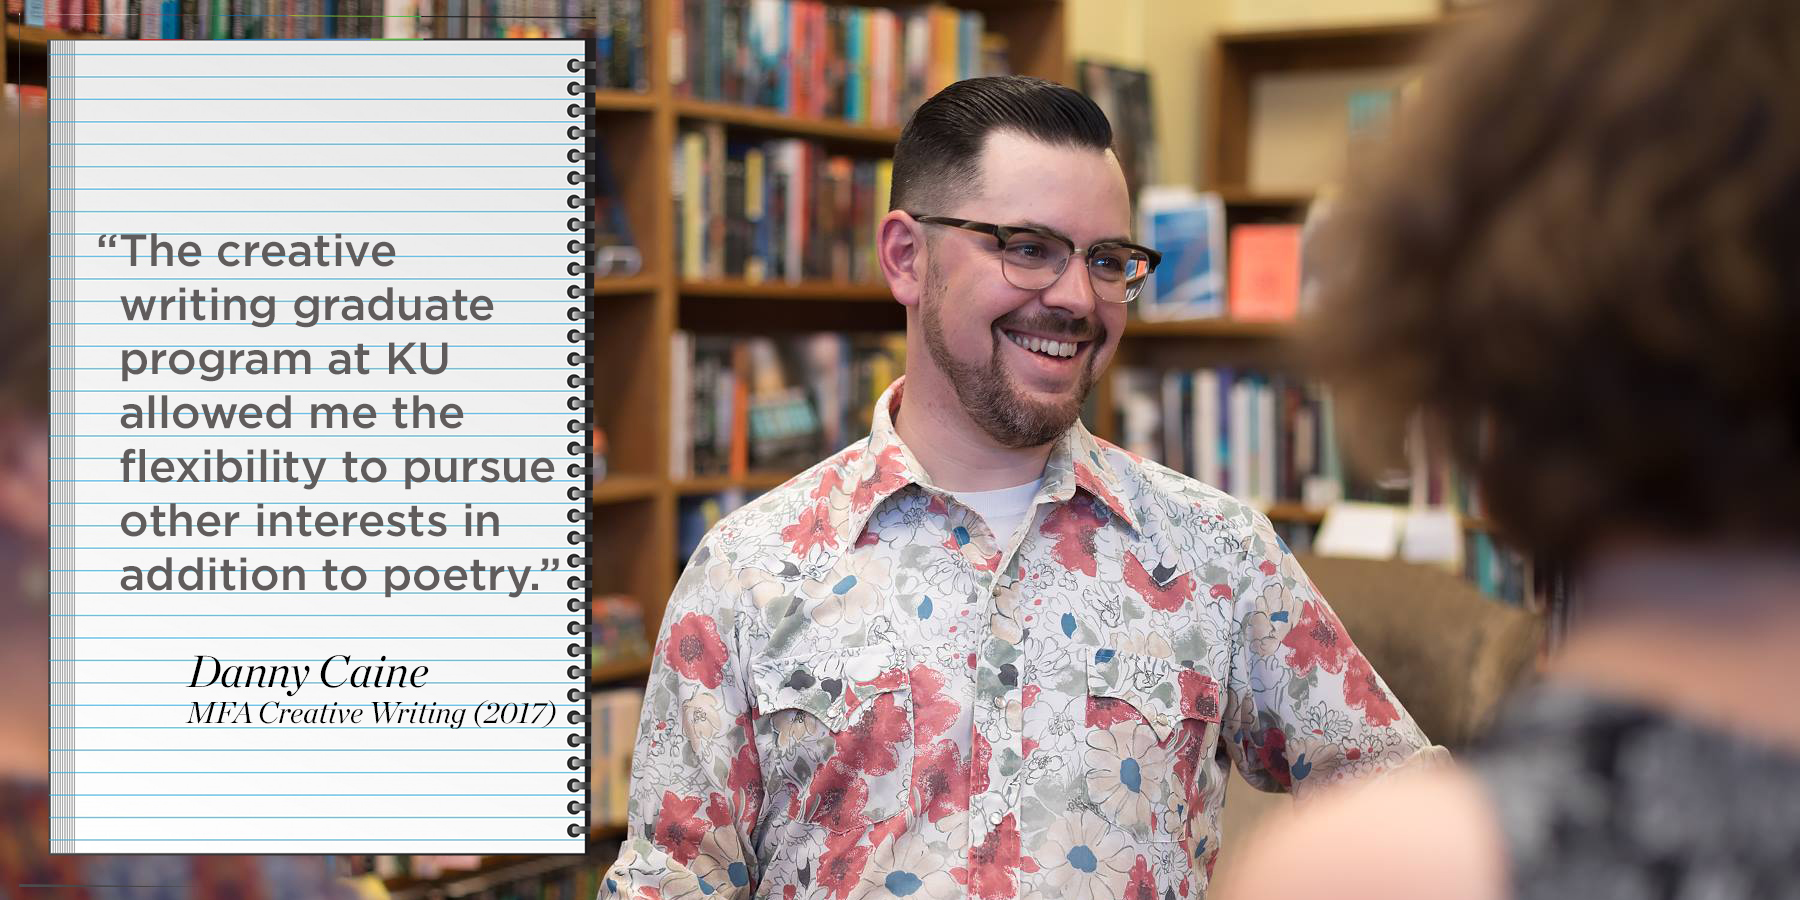 “The creative writing graduate program at KU allowed me the flexibility to pursue other interests in addition to poetry.” 